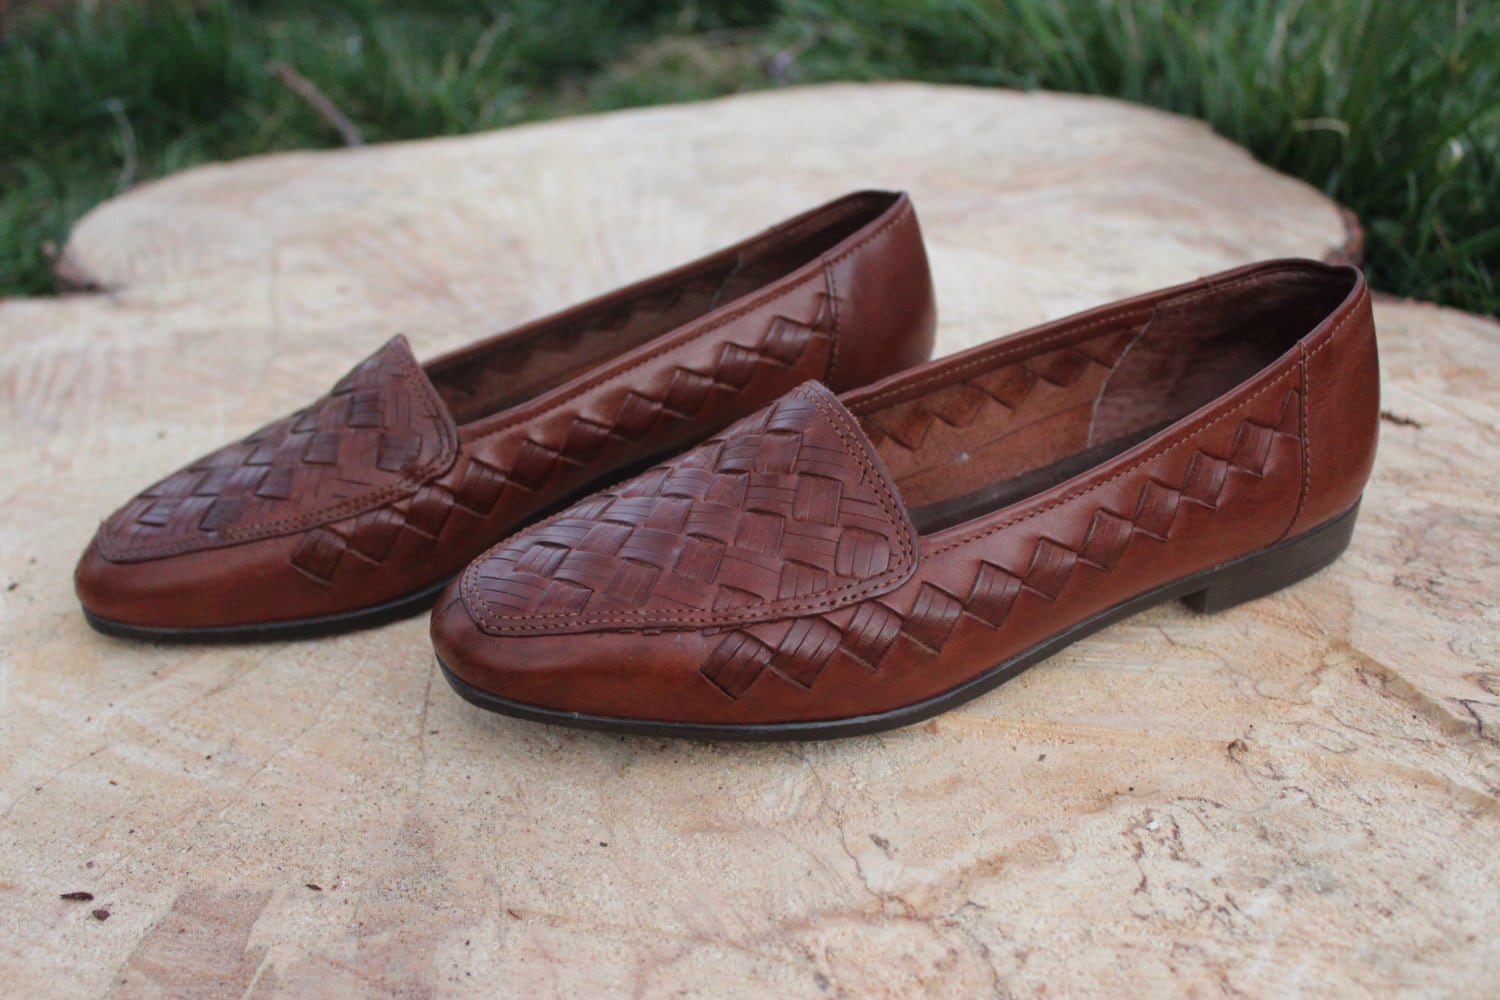 Brazilian Brown Woven Leather Loafers